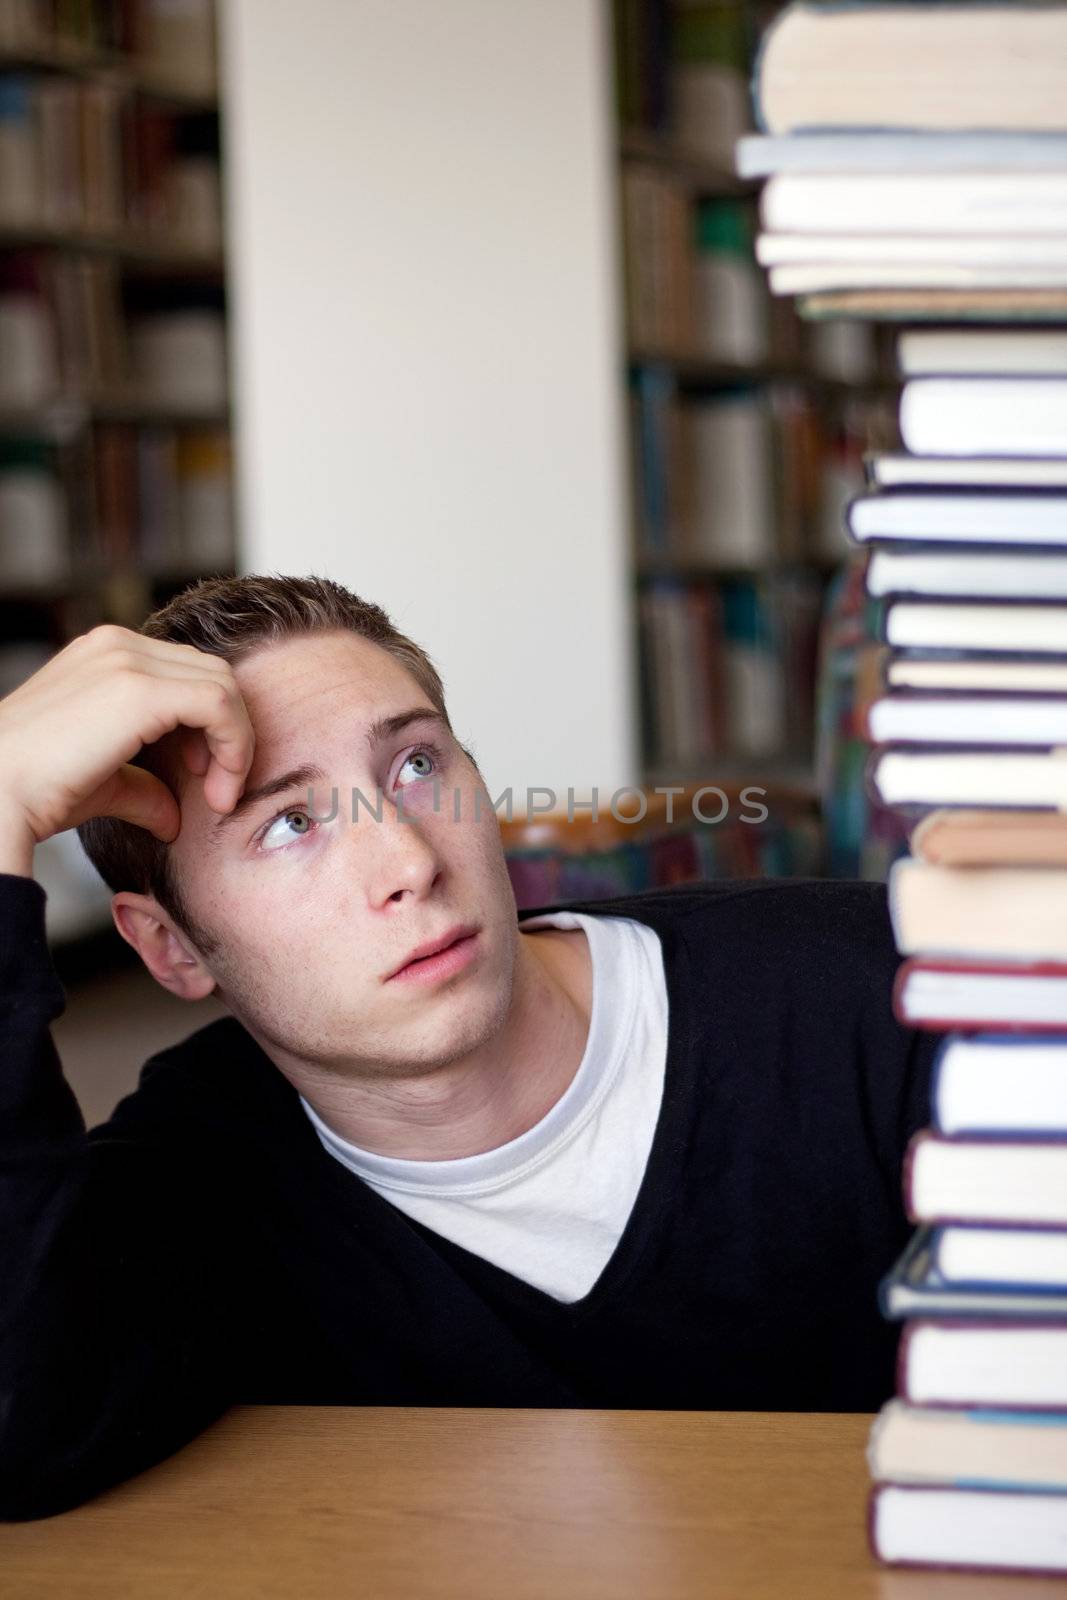 A frustrated and stressed out student looks up at the high pile of textbooks he has to go through to do his homework.